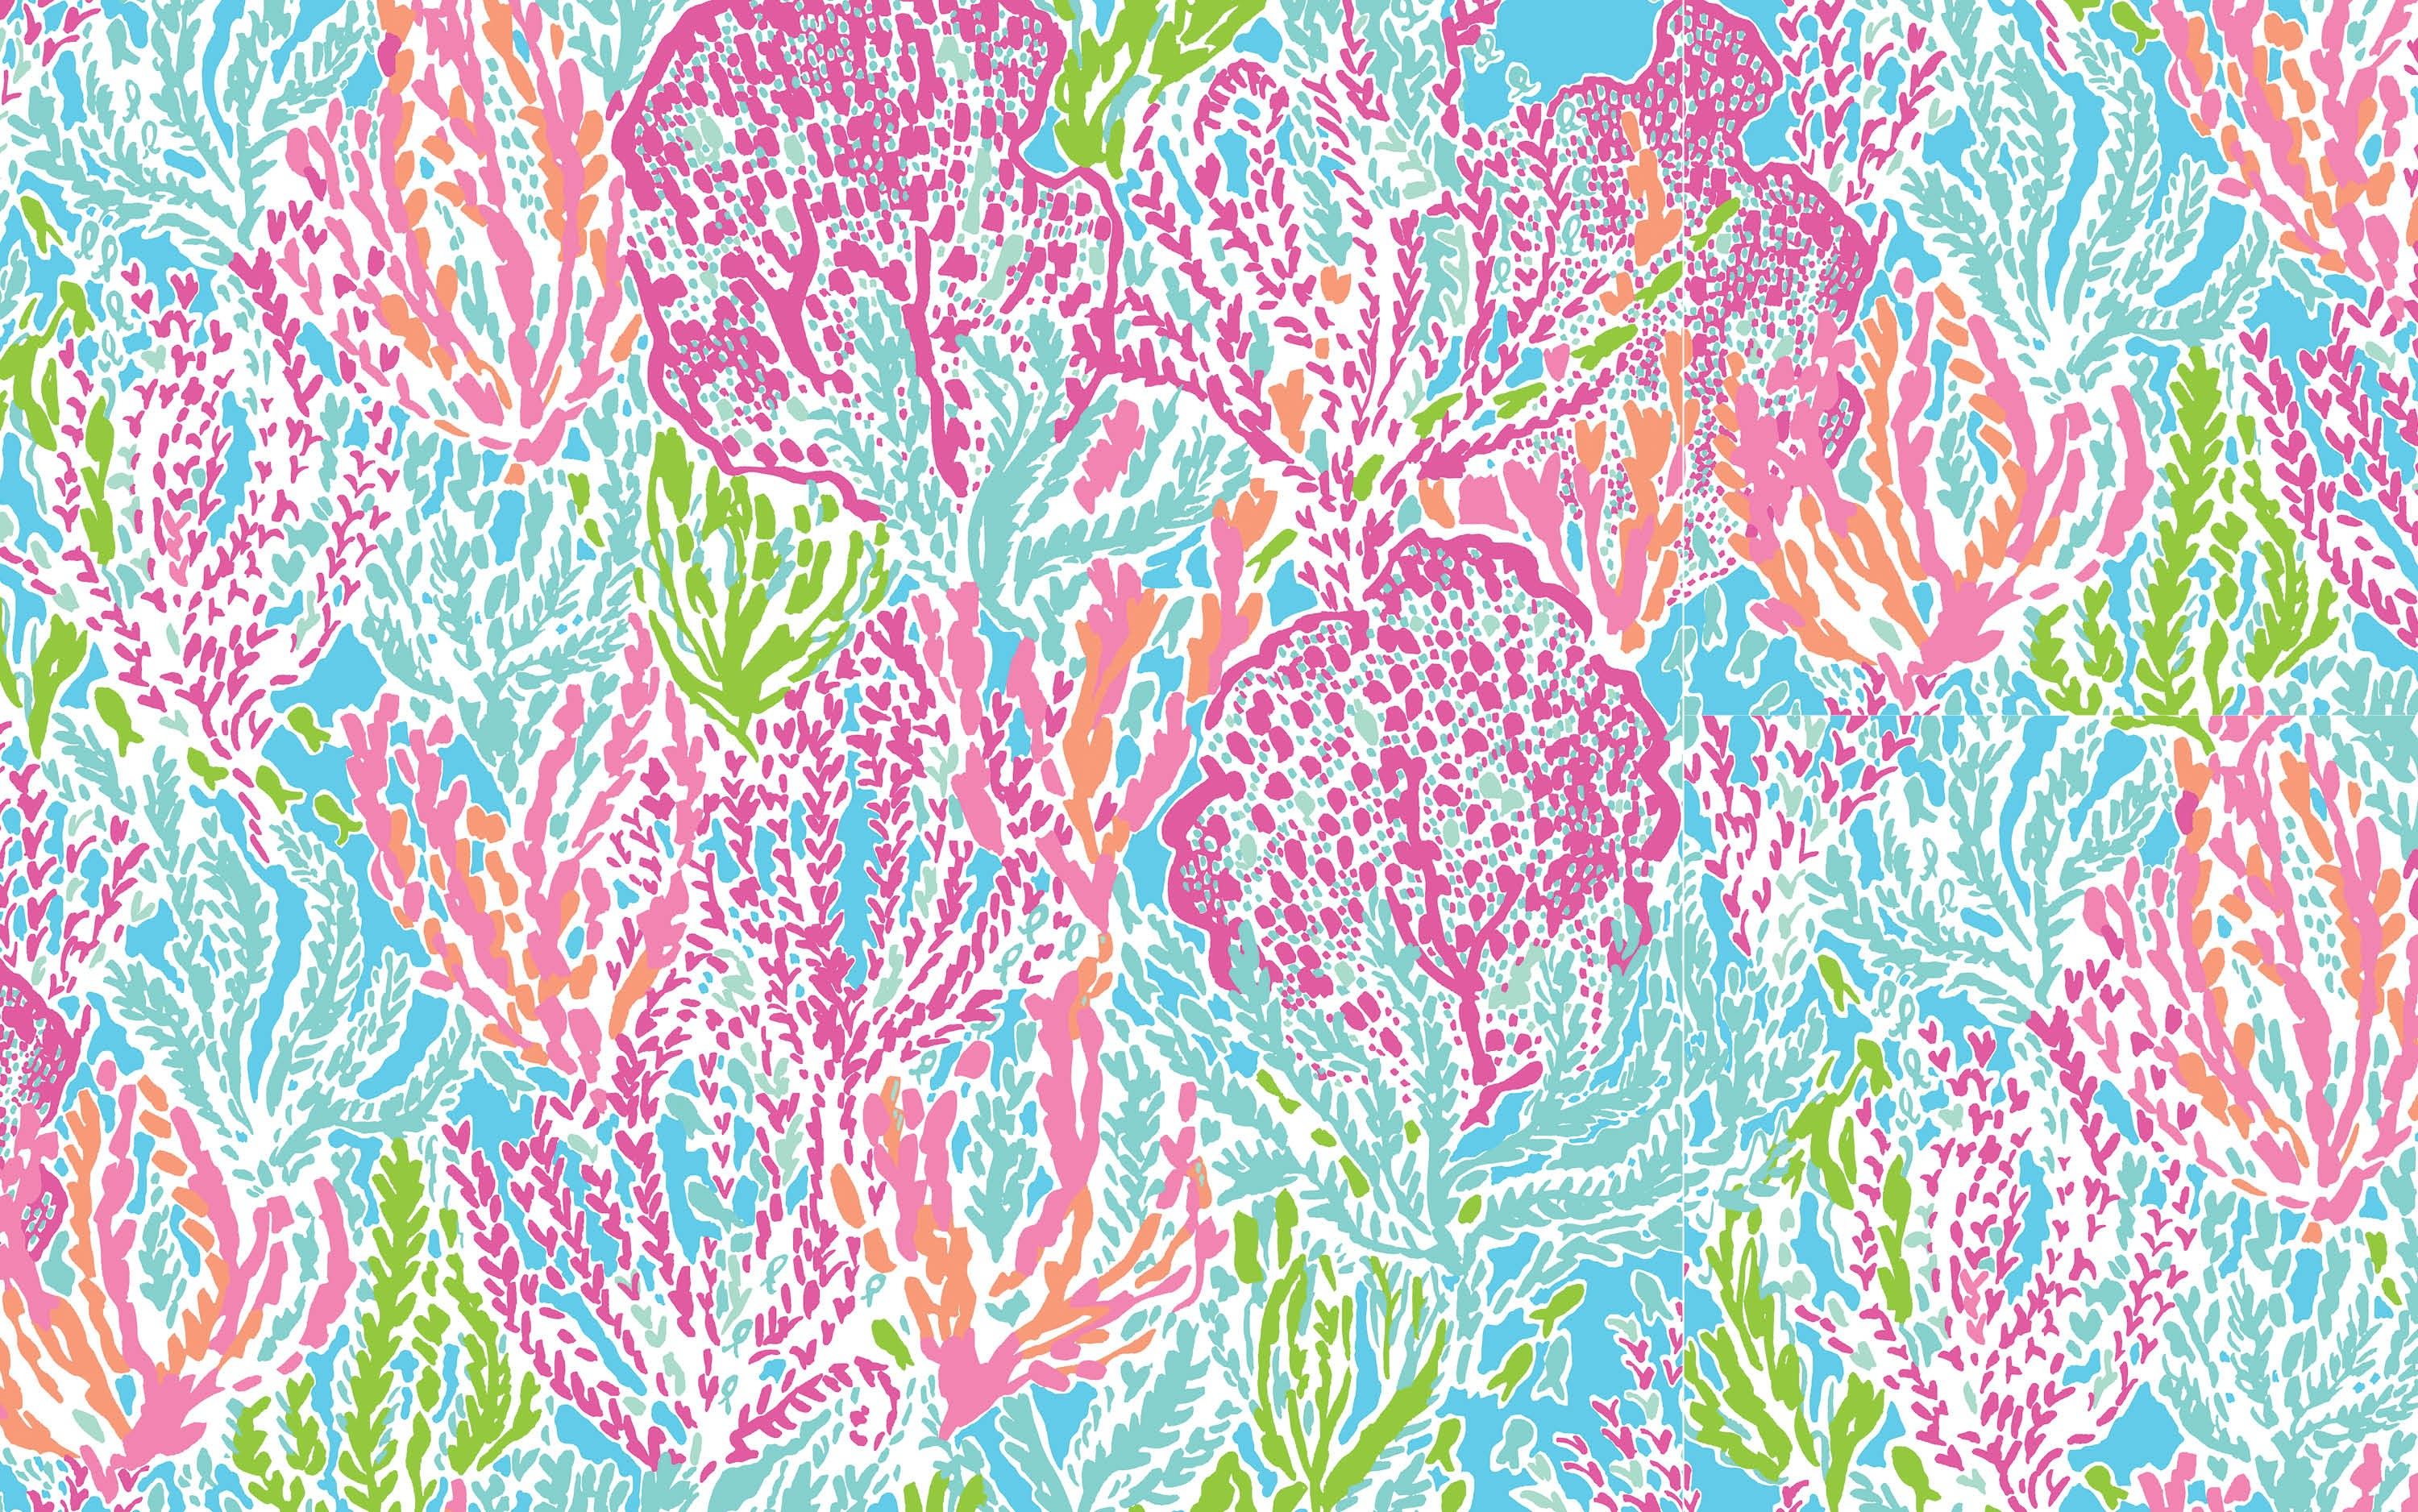 Lilly Pulitzer backgroundDownload free amazing HD